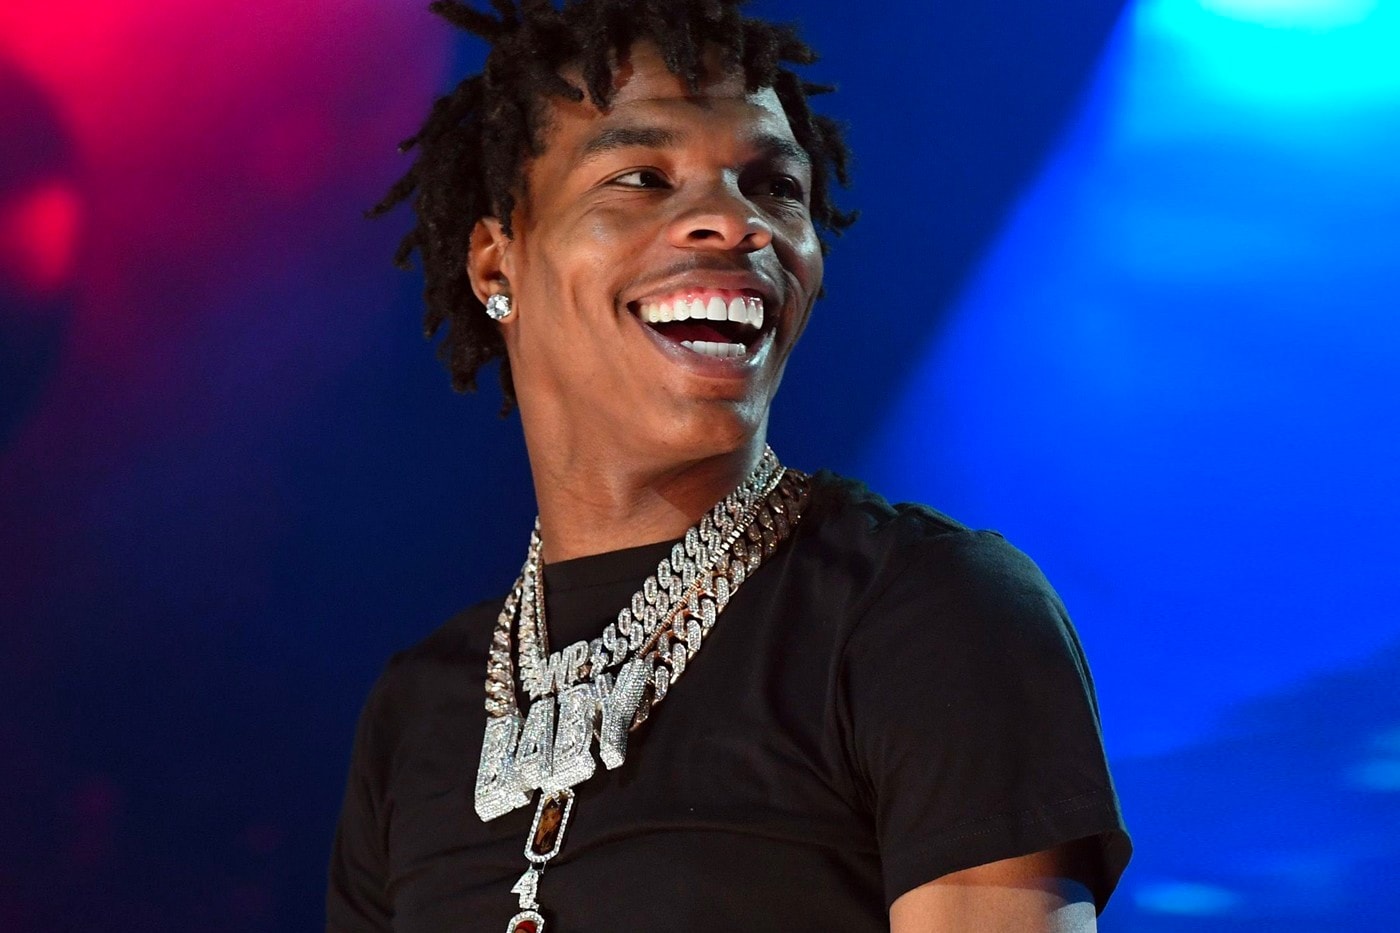 Lil Baby My Turn no 1 Billboard 200 Fourth Week the weeknd after hours bob dylan rough and rowdy ways a boogie wit da hoodie dababy post malone drake 